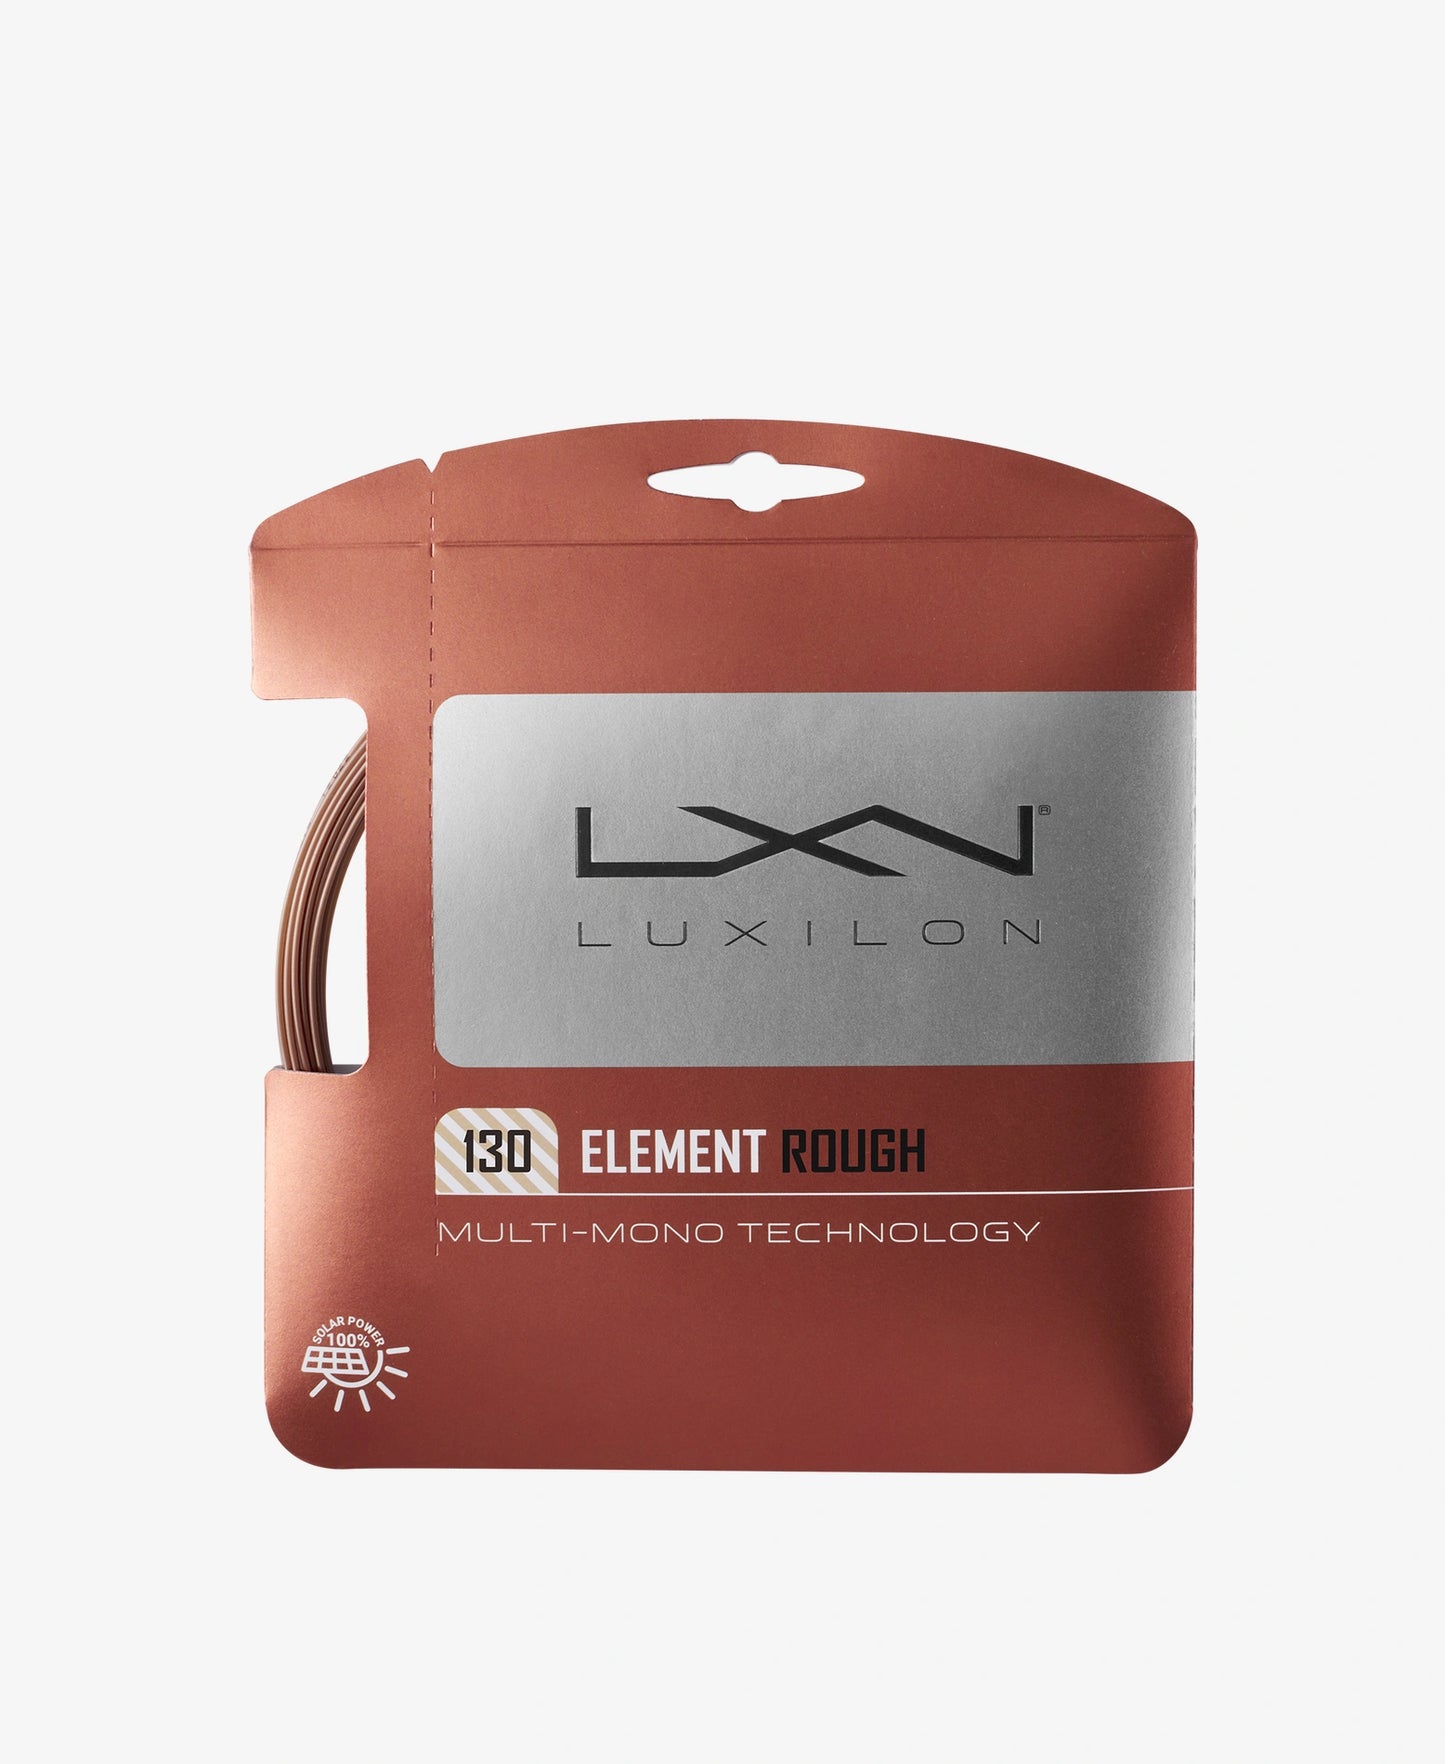 The Luxilon Element Rough 130 Tennis String-Set are available for sale at GSM Sports.